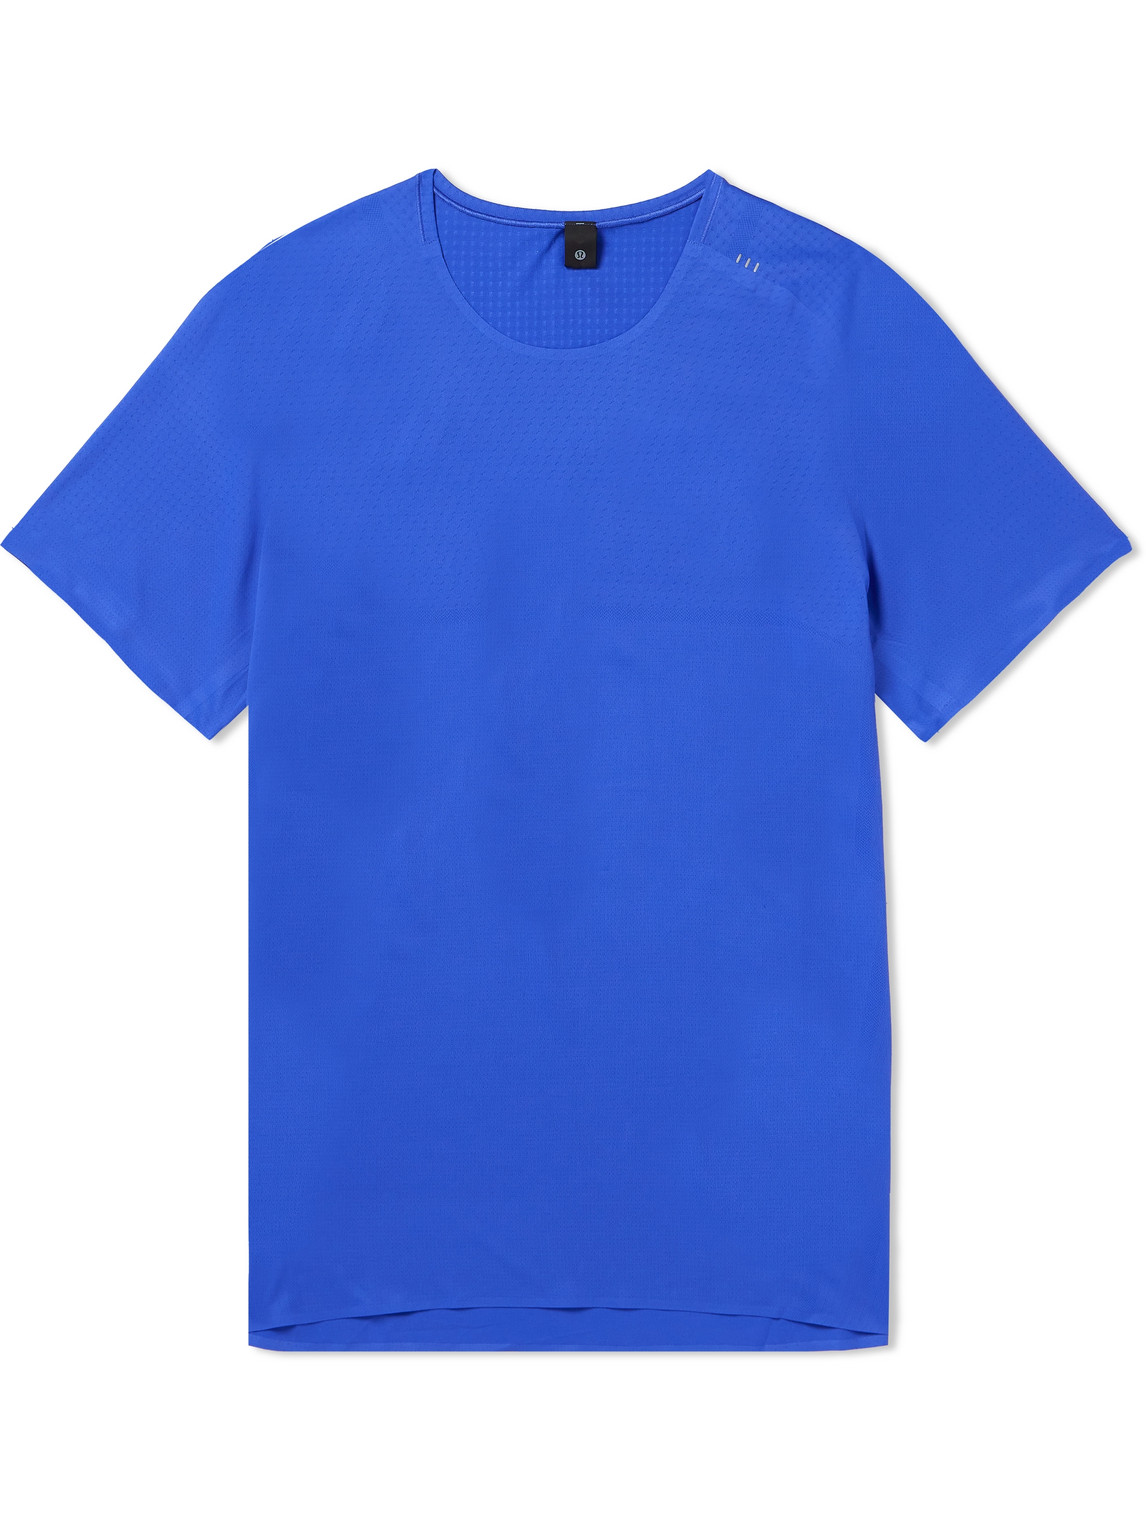 Lululemon Fast And Free Recycled Breathe Light™ Mesh T-shirt In Blue